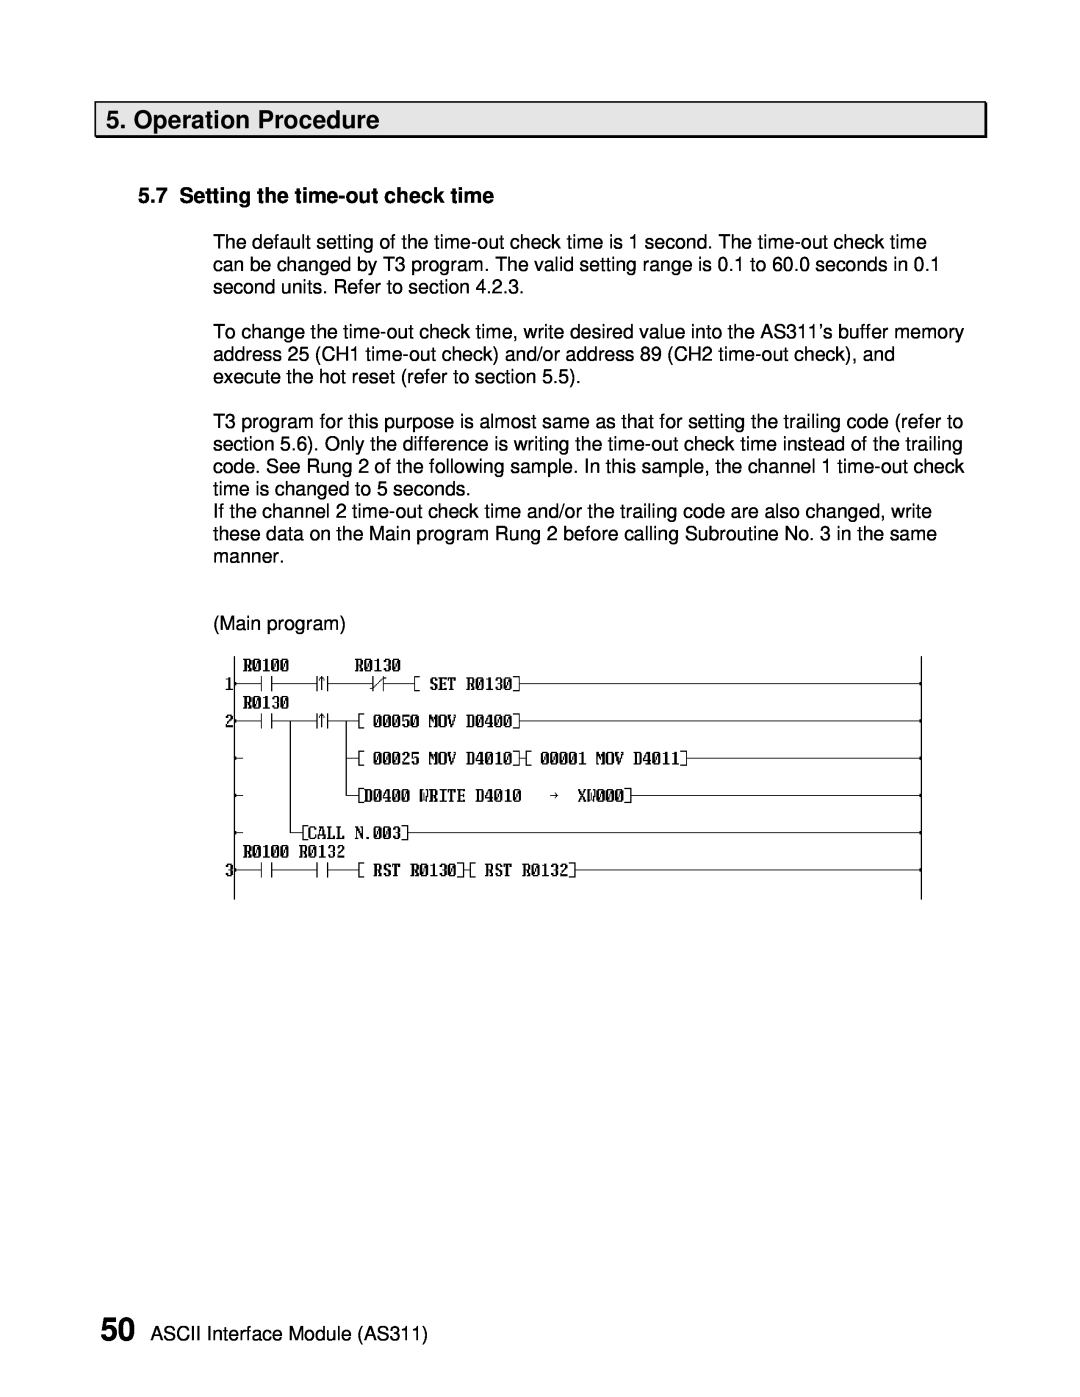 Toshiba AS311 user manual Setting the time-out check time, Operation Procedure 